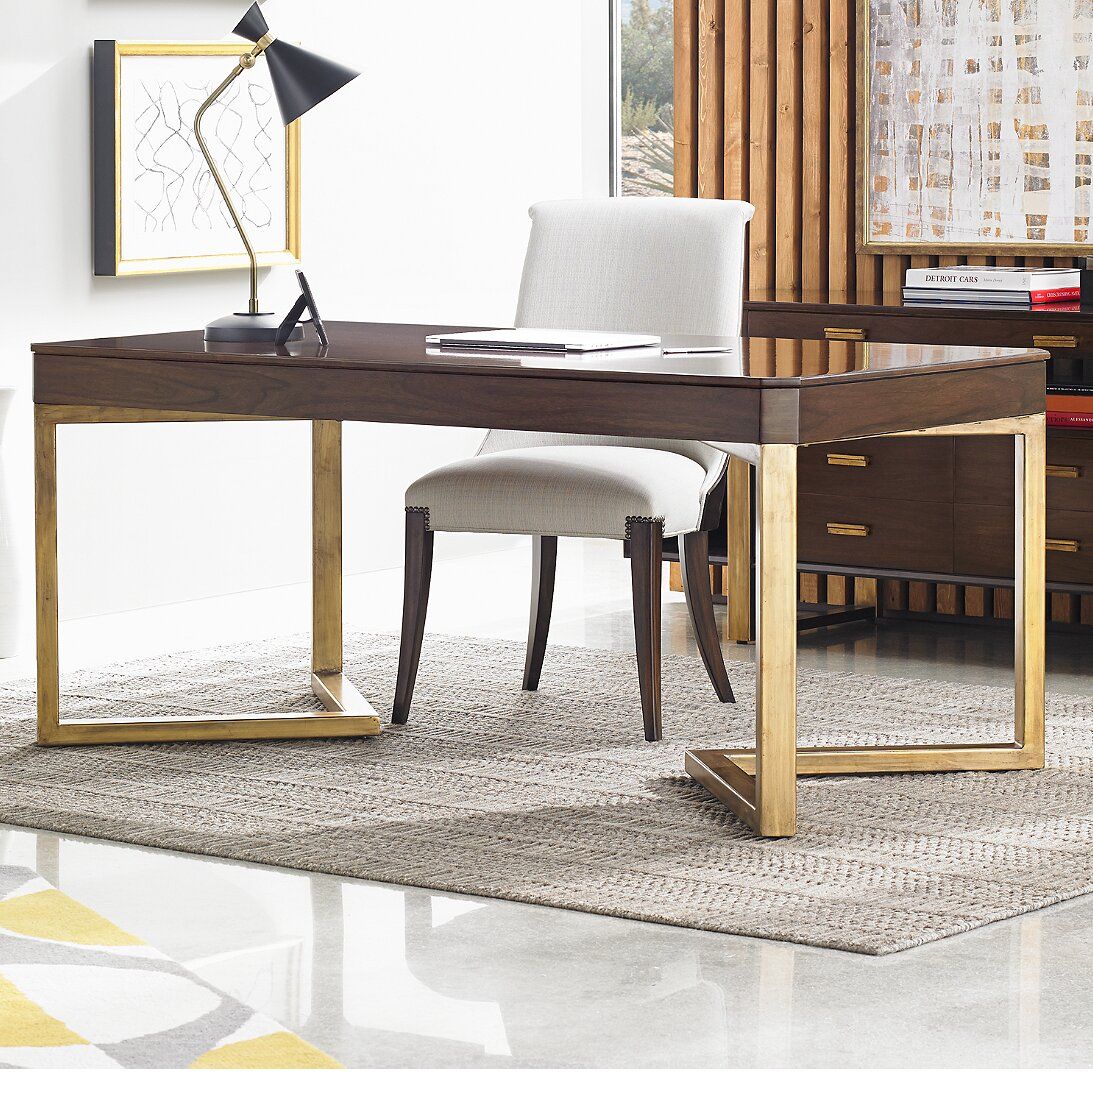 Stanley Crestaire Vincennes Writing Desk & Reviews | Wayfair Inside Gold And Pink Writing Desks (View 2 of 15)